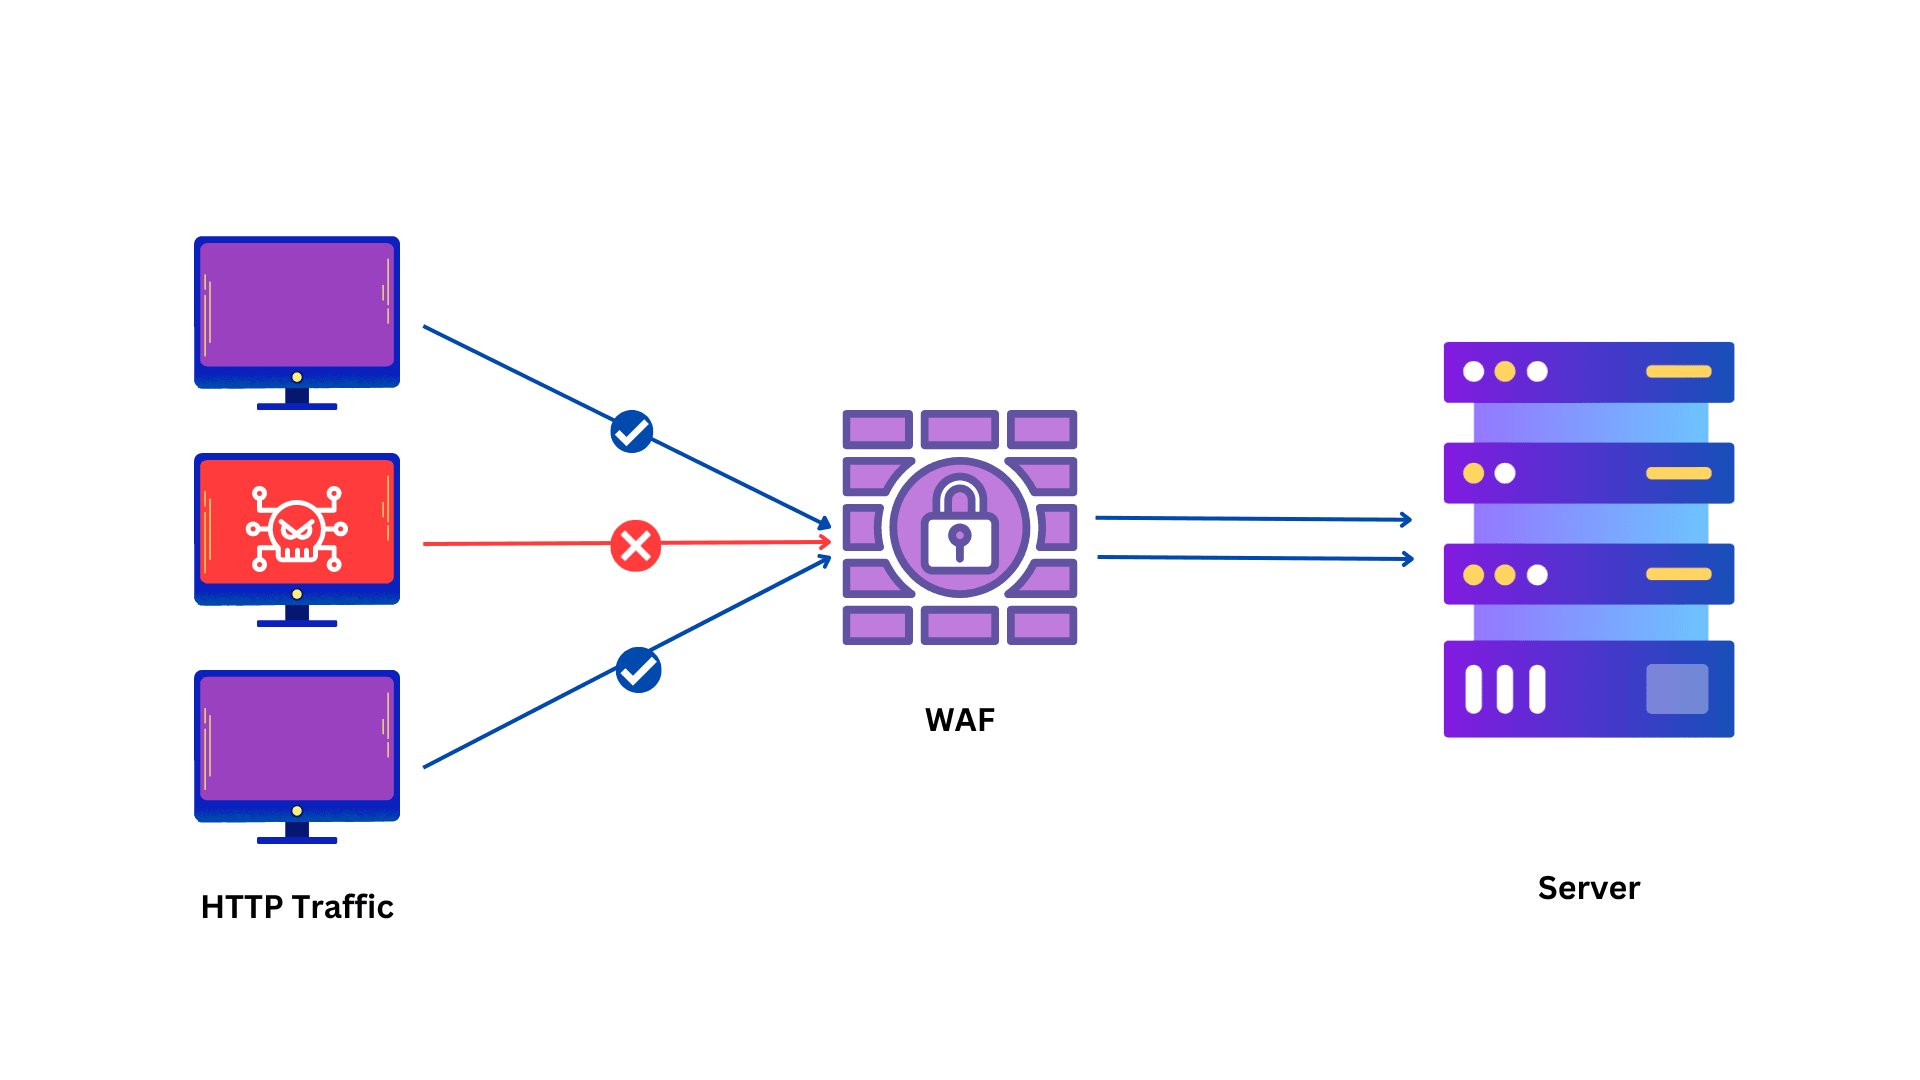 3. How does WAF work?